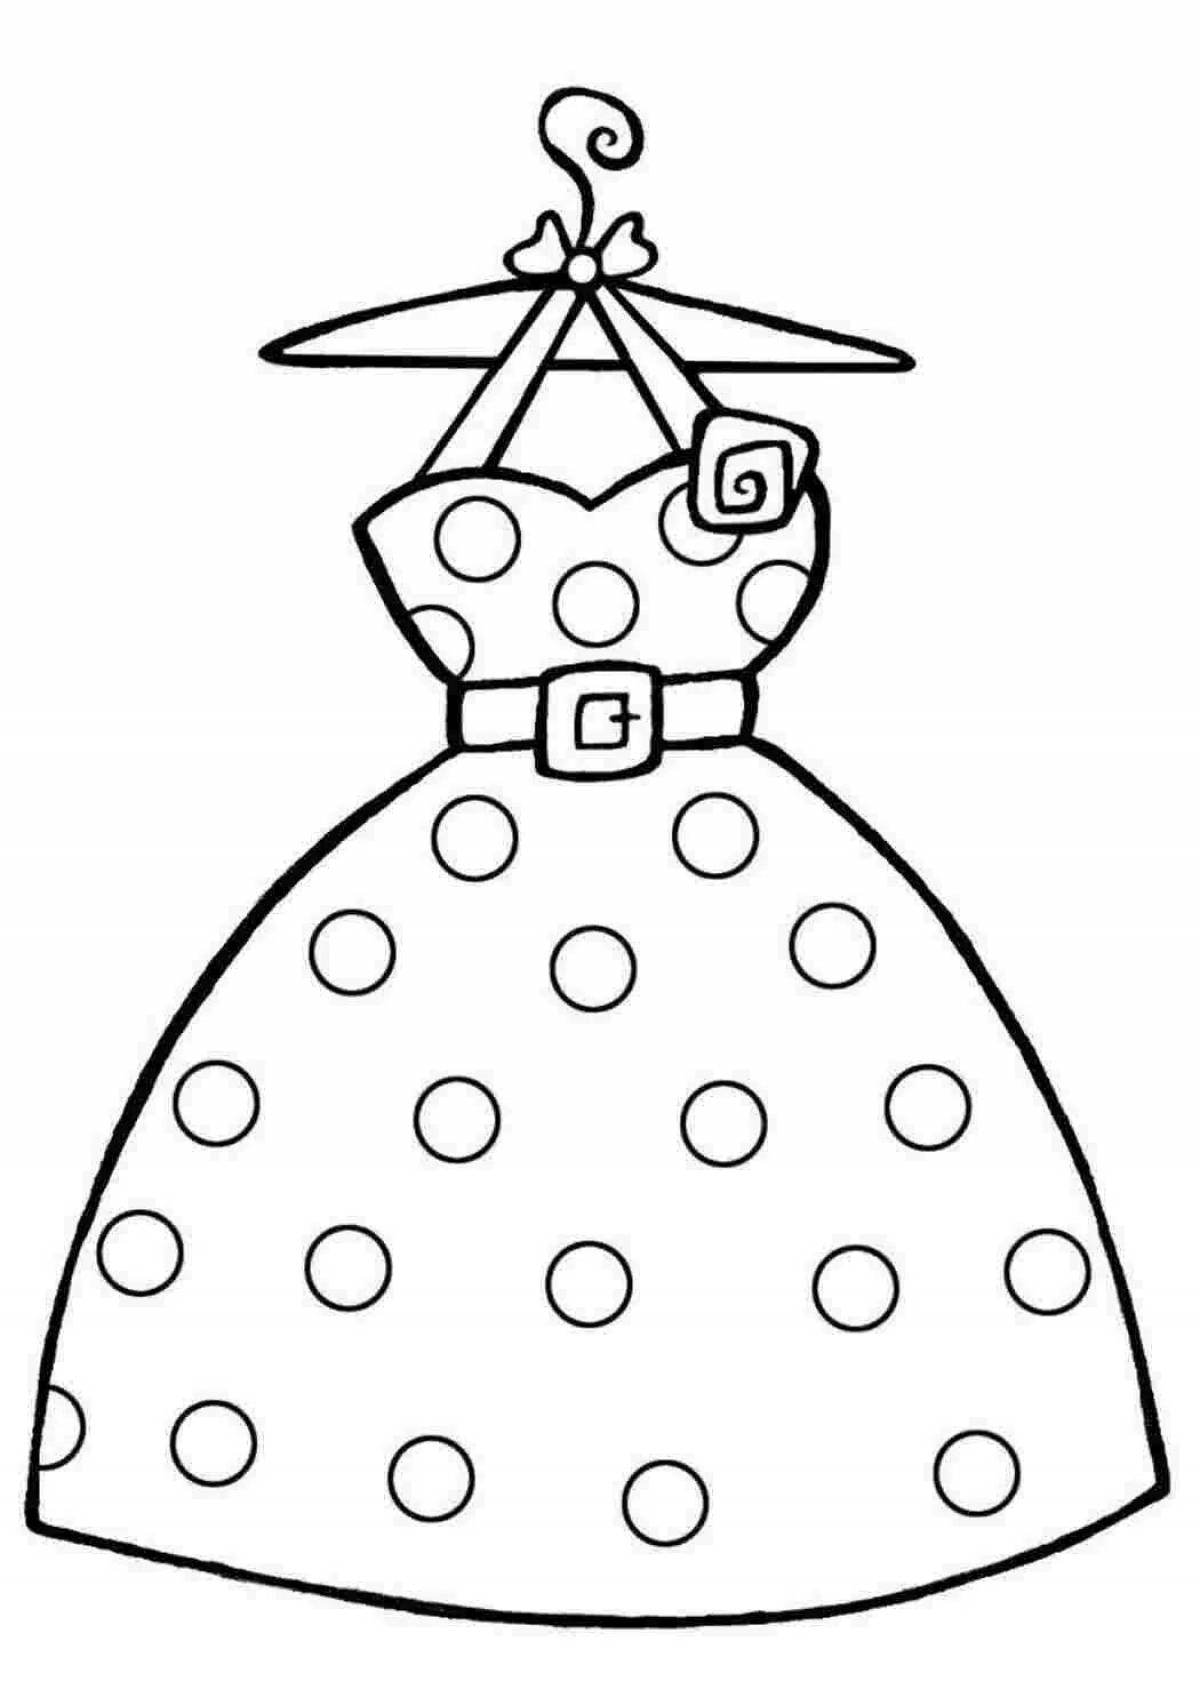 Coloring page dress with showy clothes